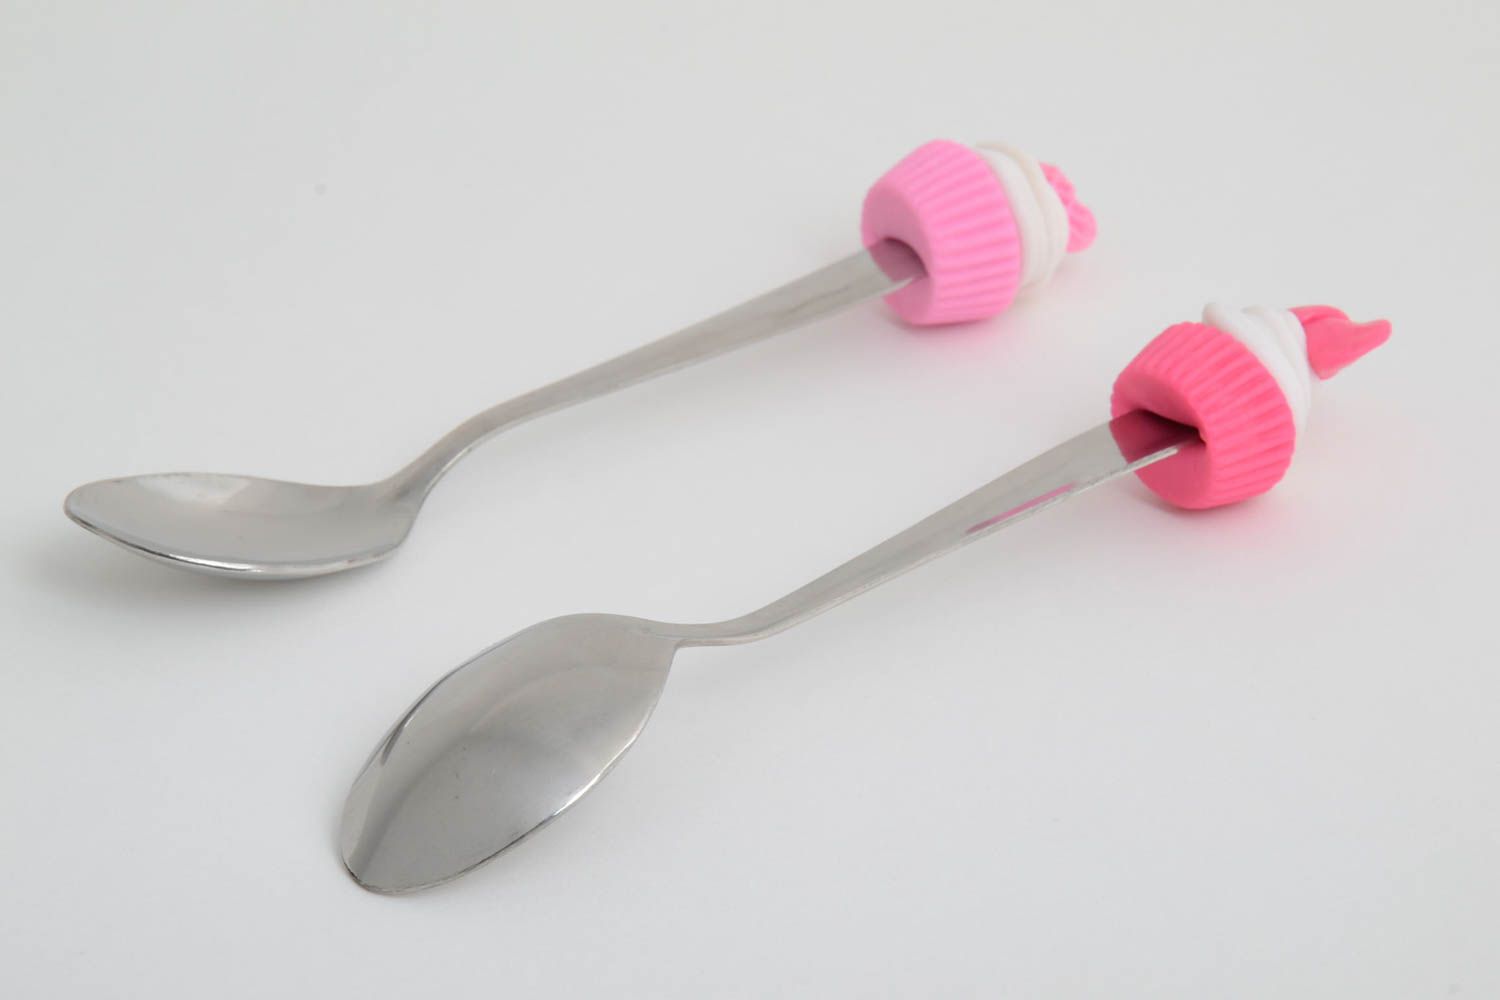 Handmade spoons set of 2 items unusual gift tablespoon kitchen accessories photo 3